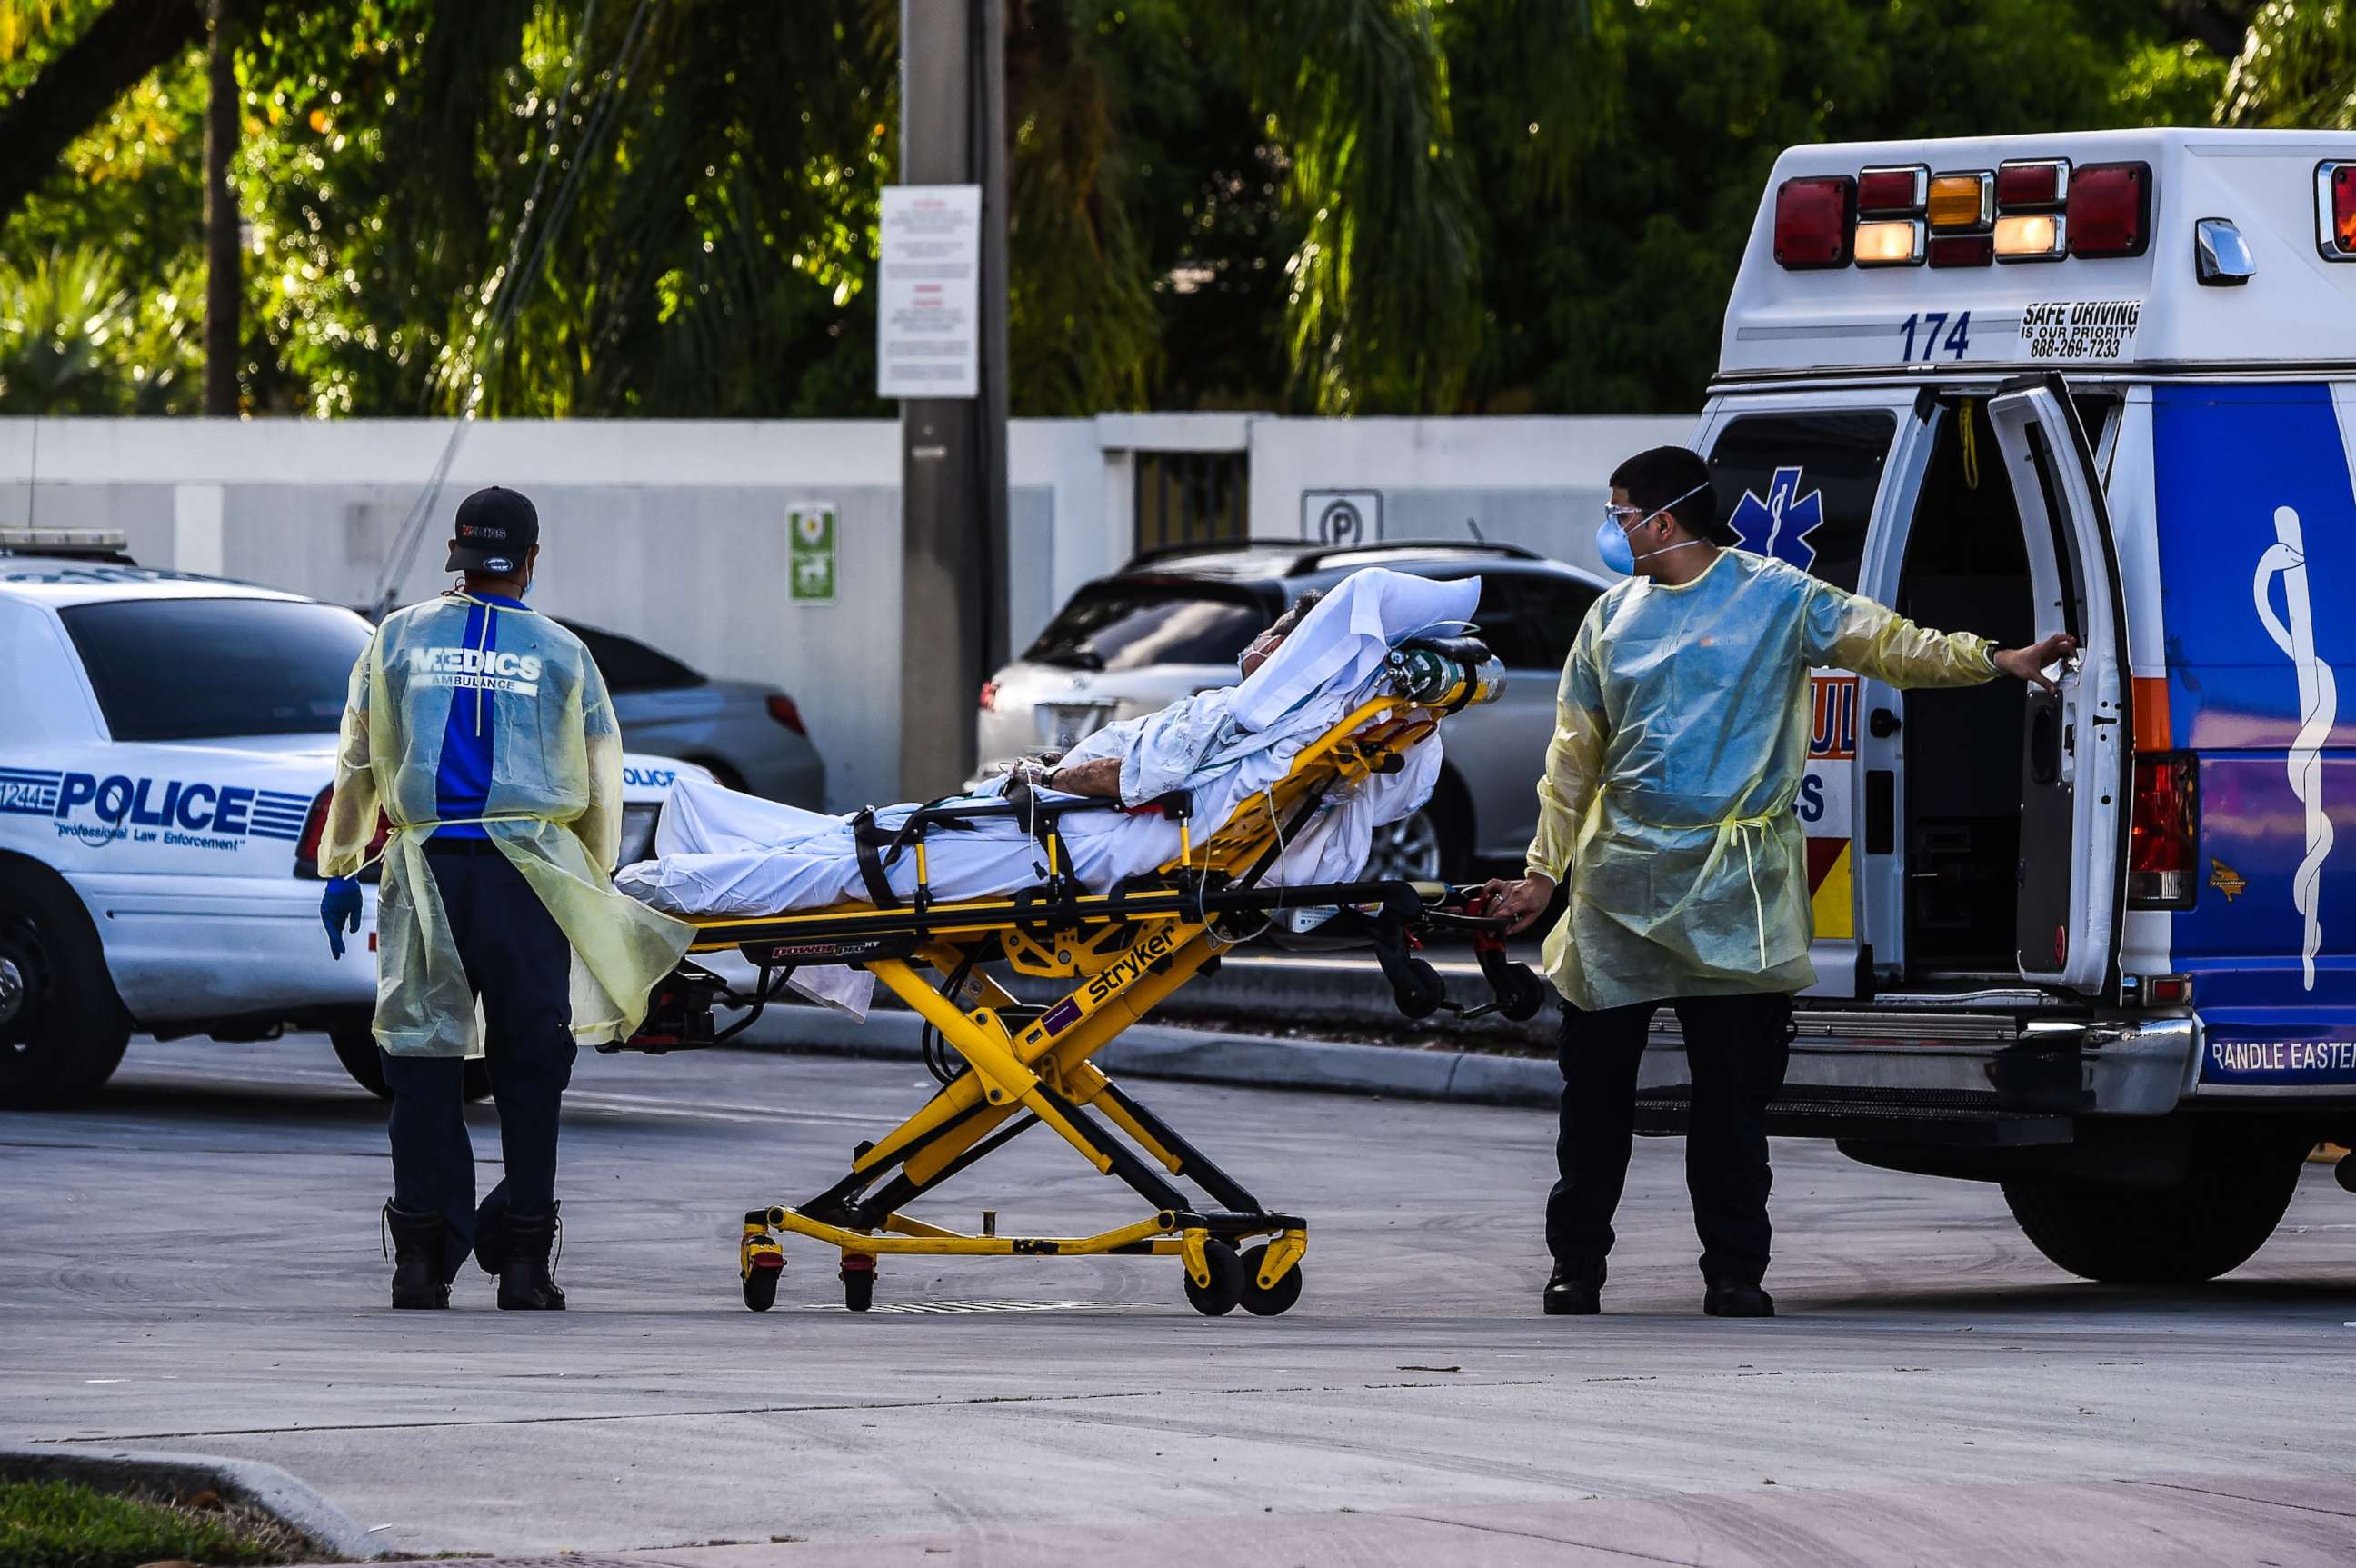 PHOTO: Medics transfer a patient on a stretcher from an ambulance outside of Emergency at Coral Gables Hospital where COVID-19 patients are treated in Coral Gables near Miami, Florida, on July 30, 2020.